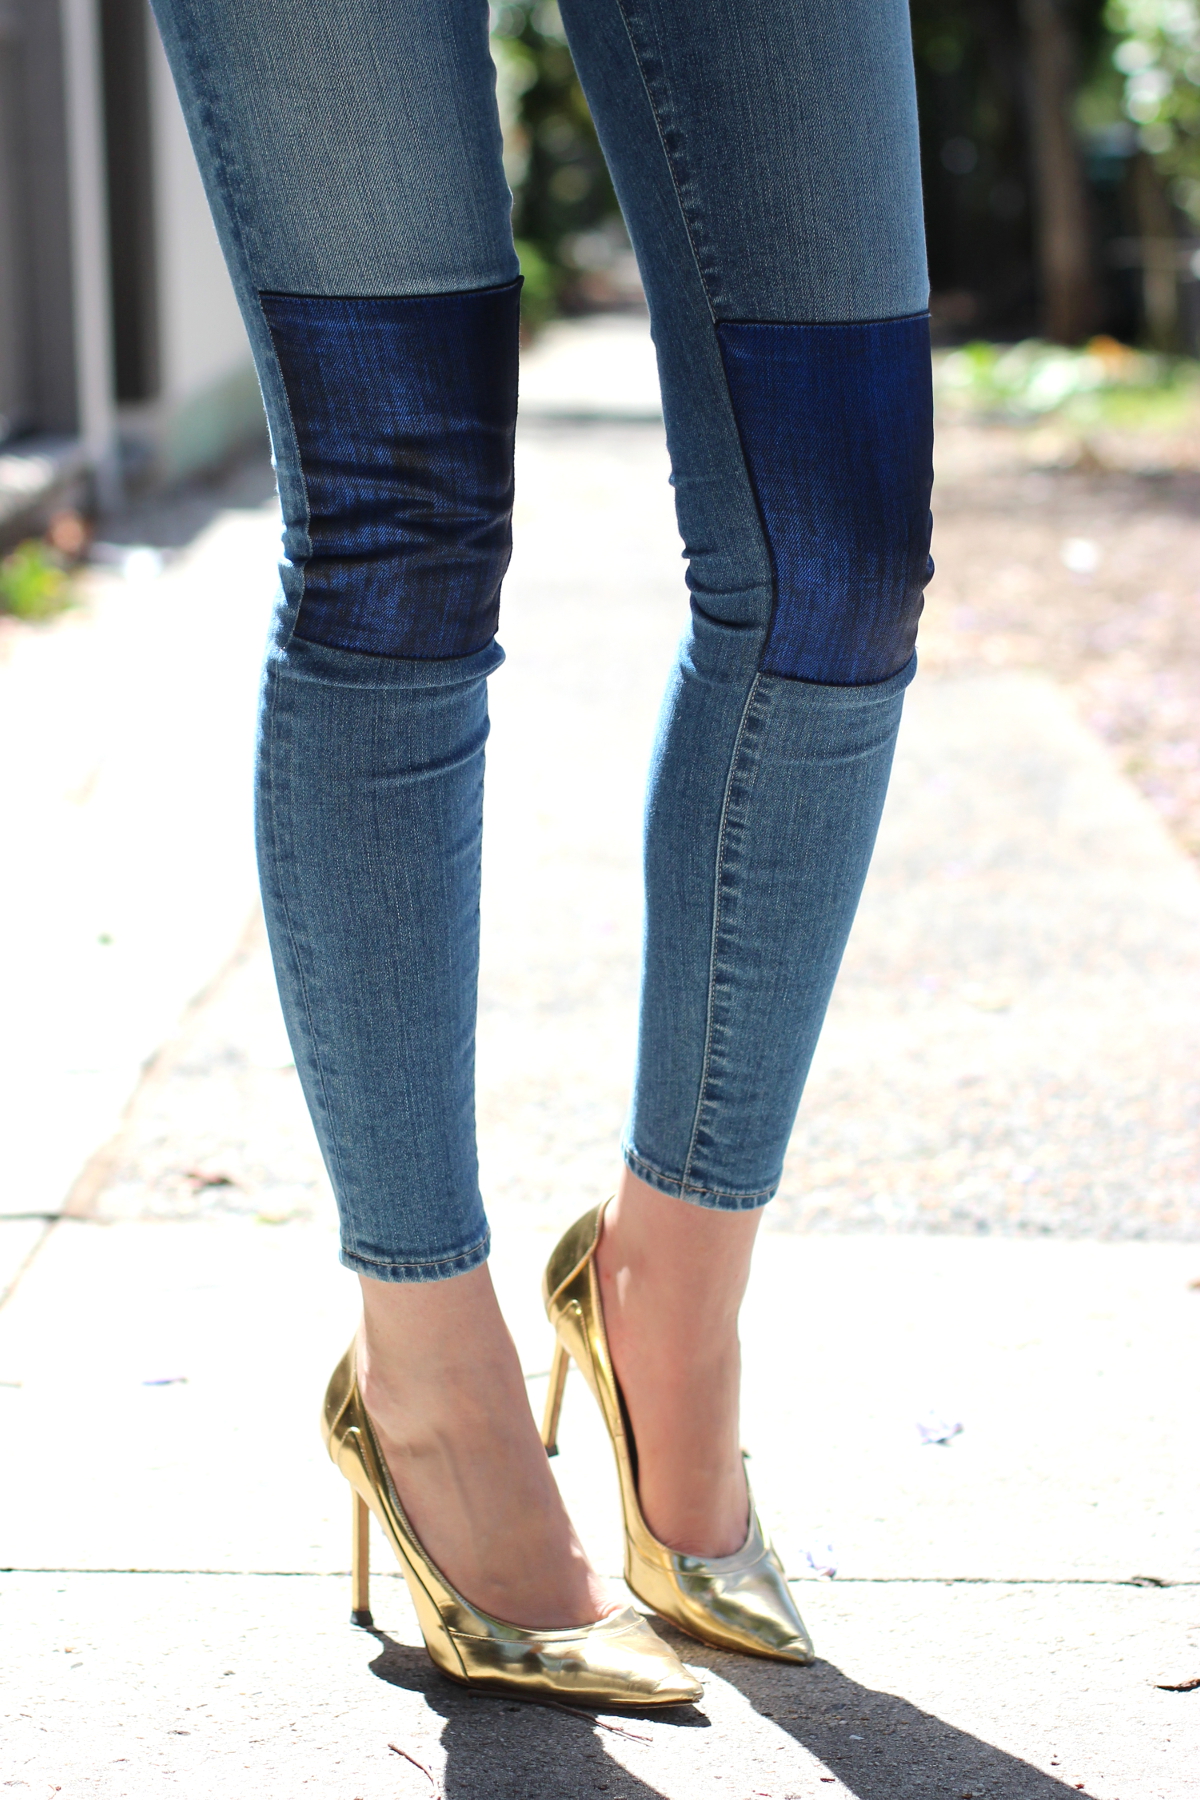 BYCHILL Paige metallic patch skinny jeans in blue and Manolo Blahnik gold ponit toe heels